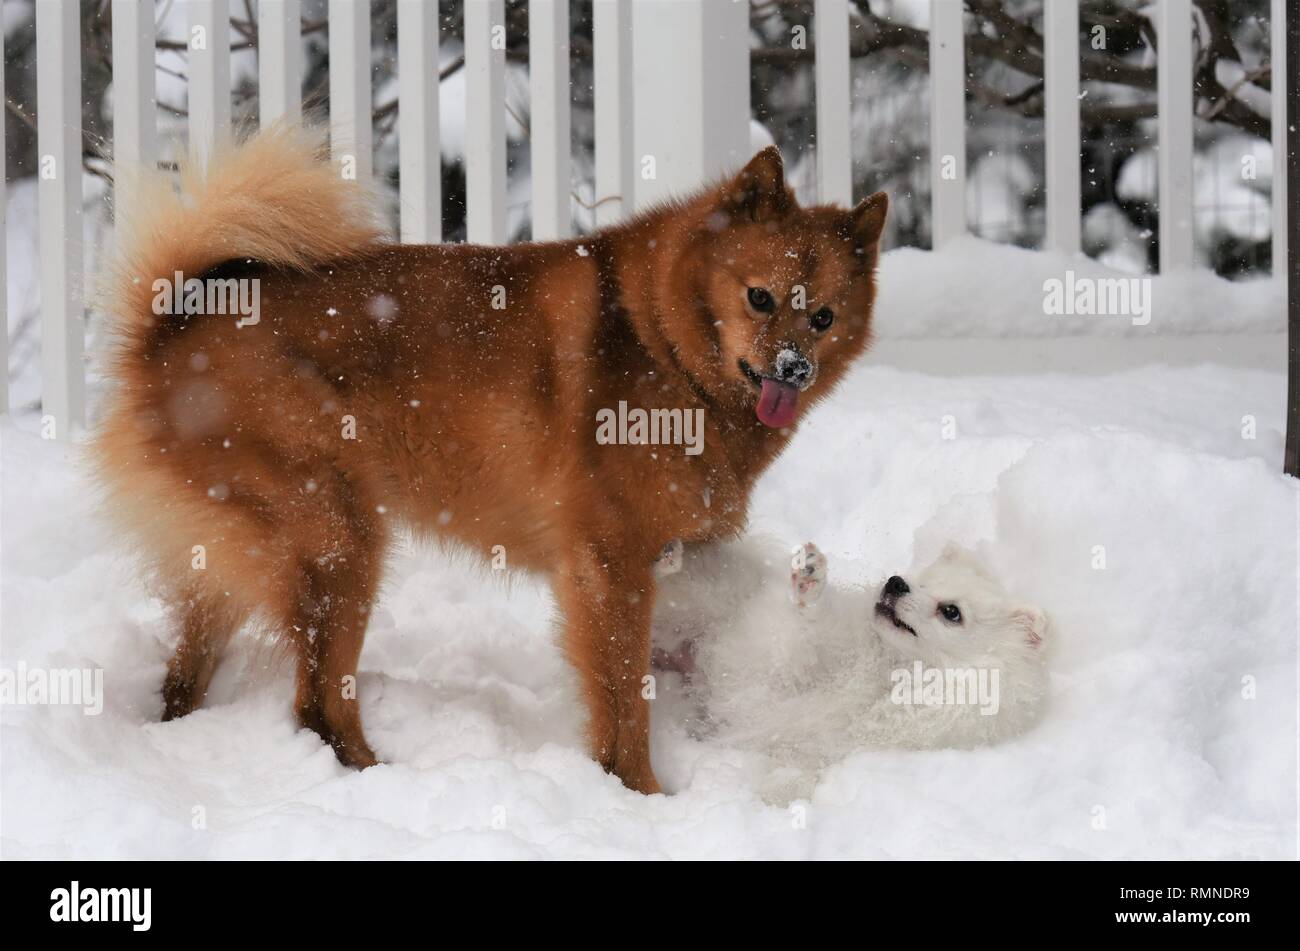 Finnish Spitz and American Eskimo played together in the snow Stock Photo